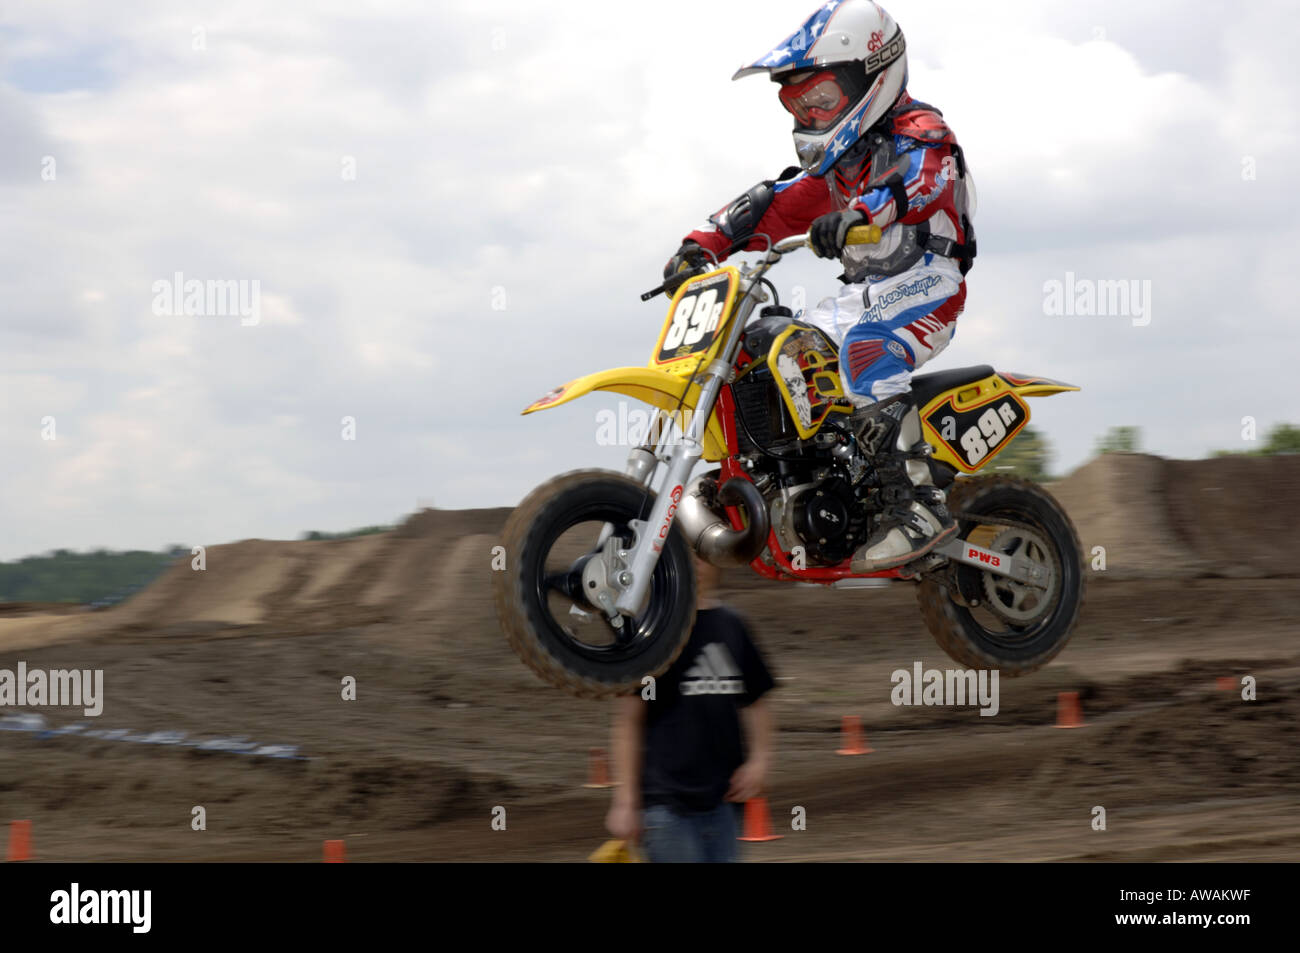 6 year old races on a Honda 50 cc motorcyle in motocross race Stock Photo